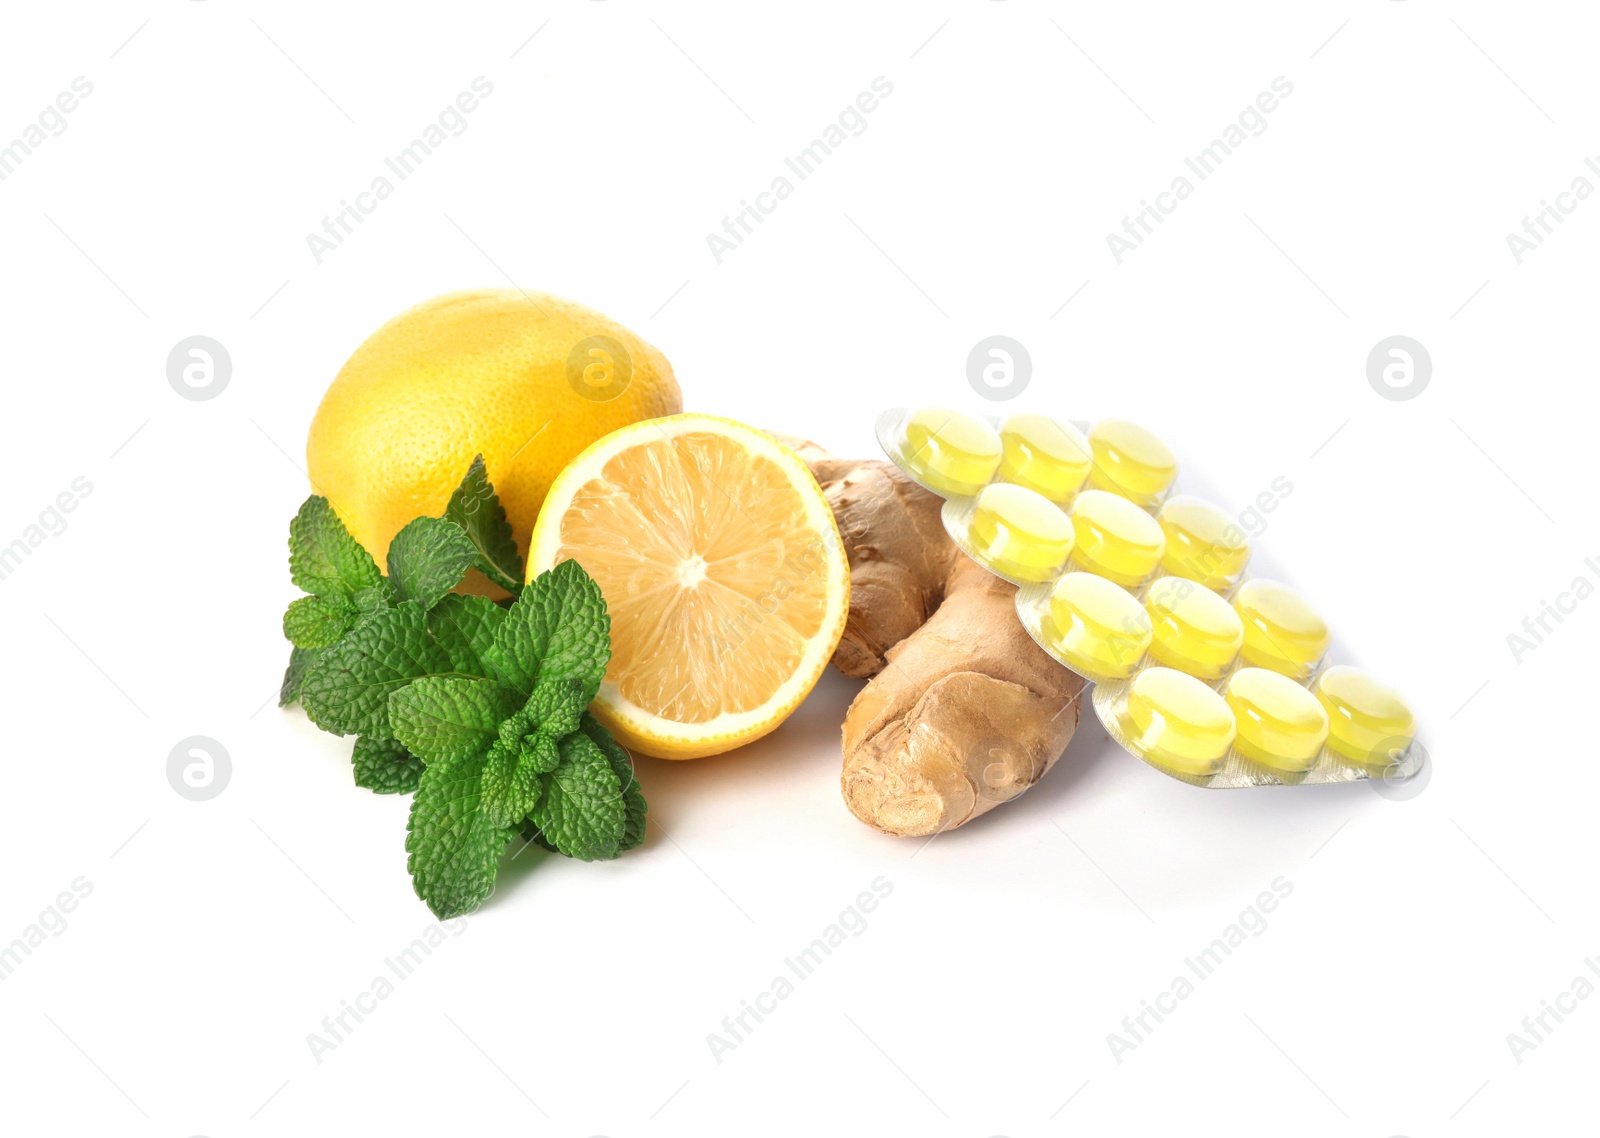 Photo of Cough candies, ginger, mint and lemons on white background